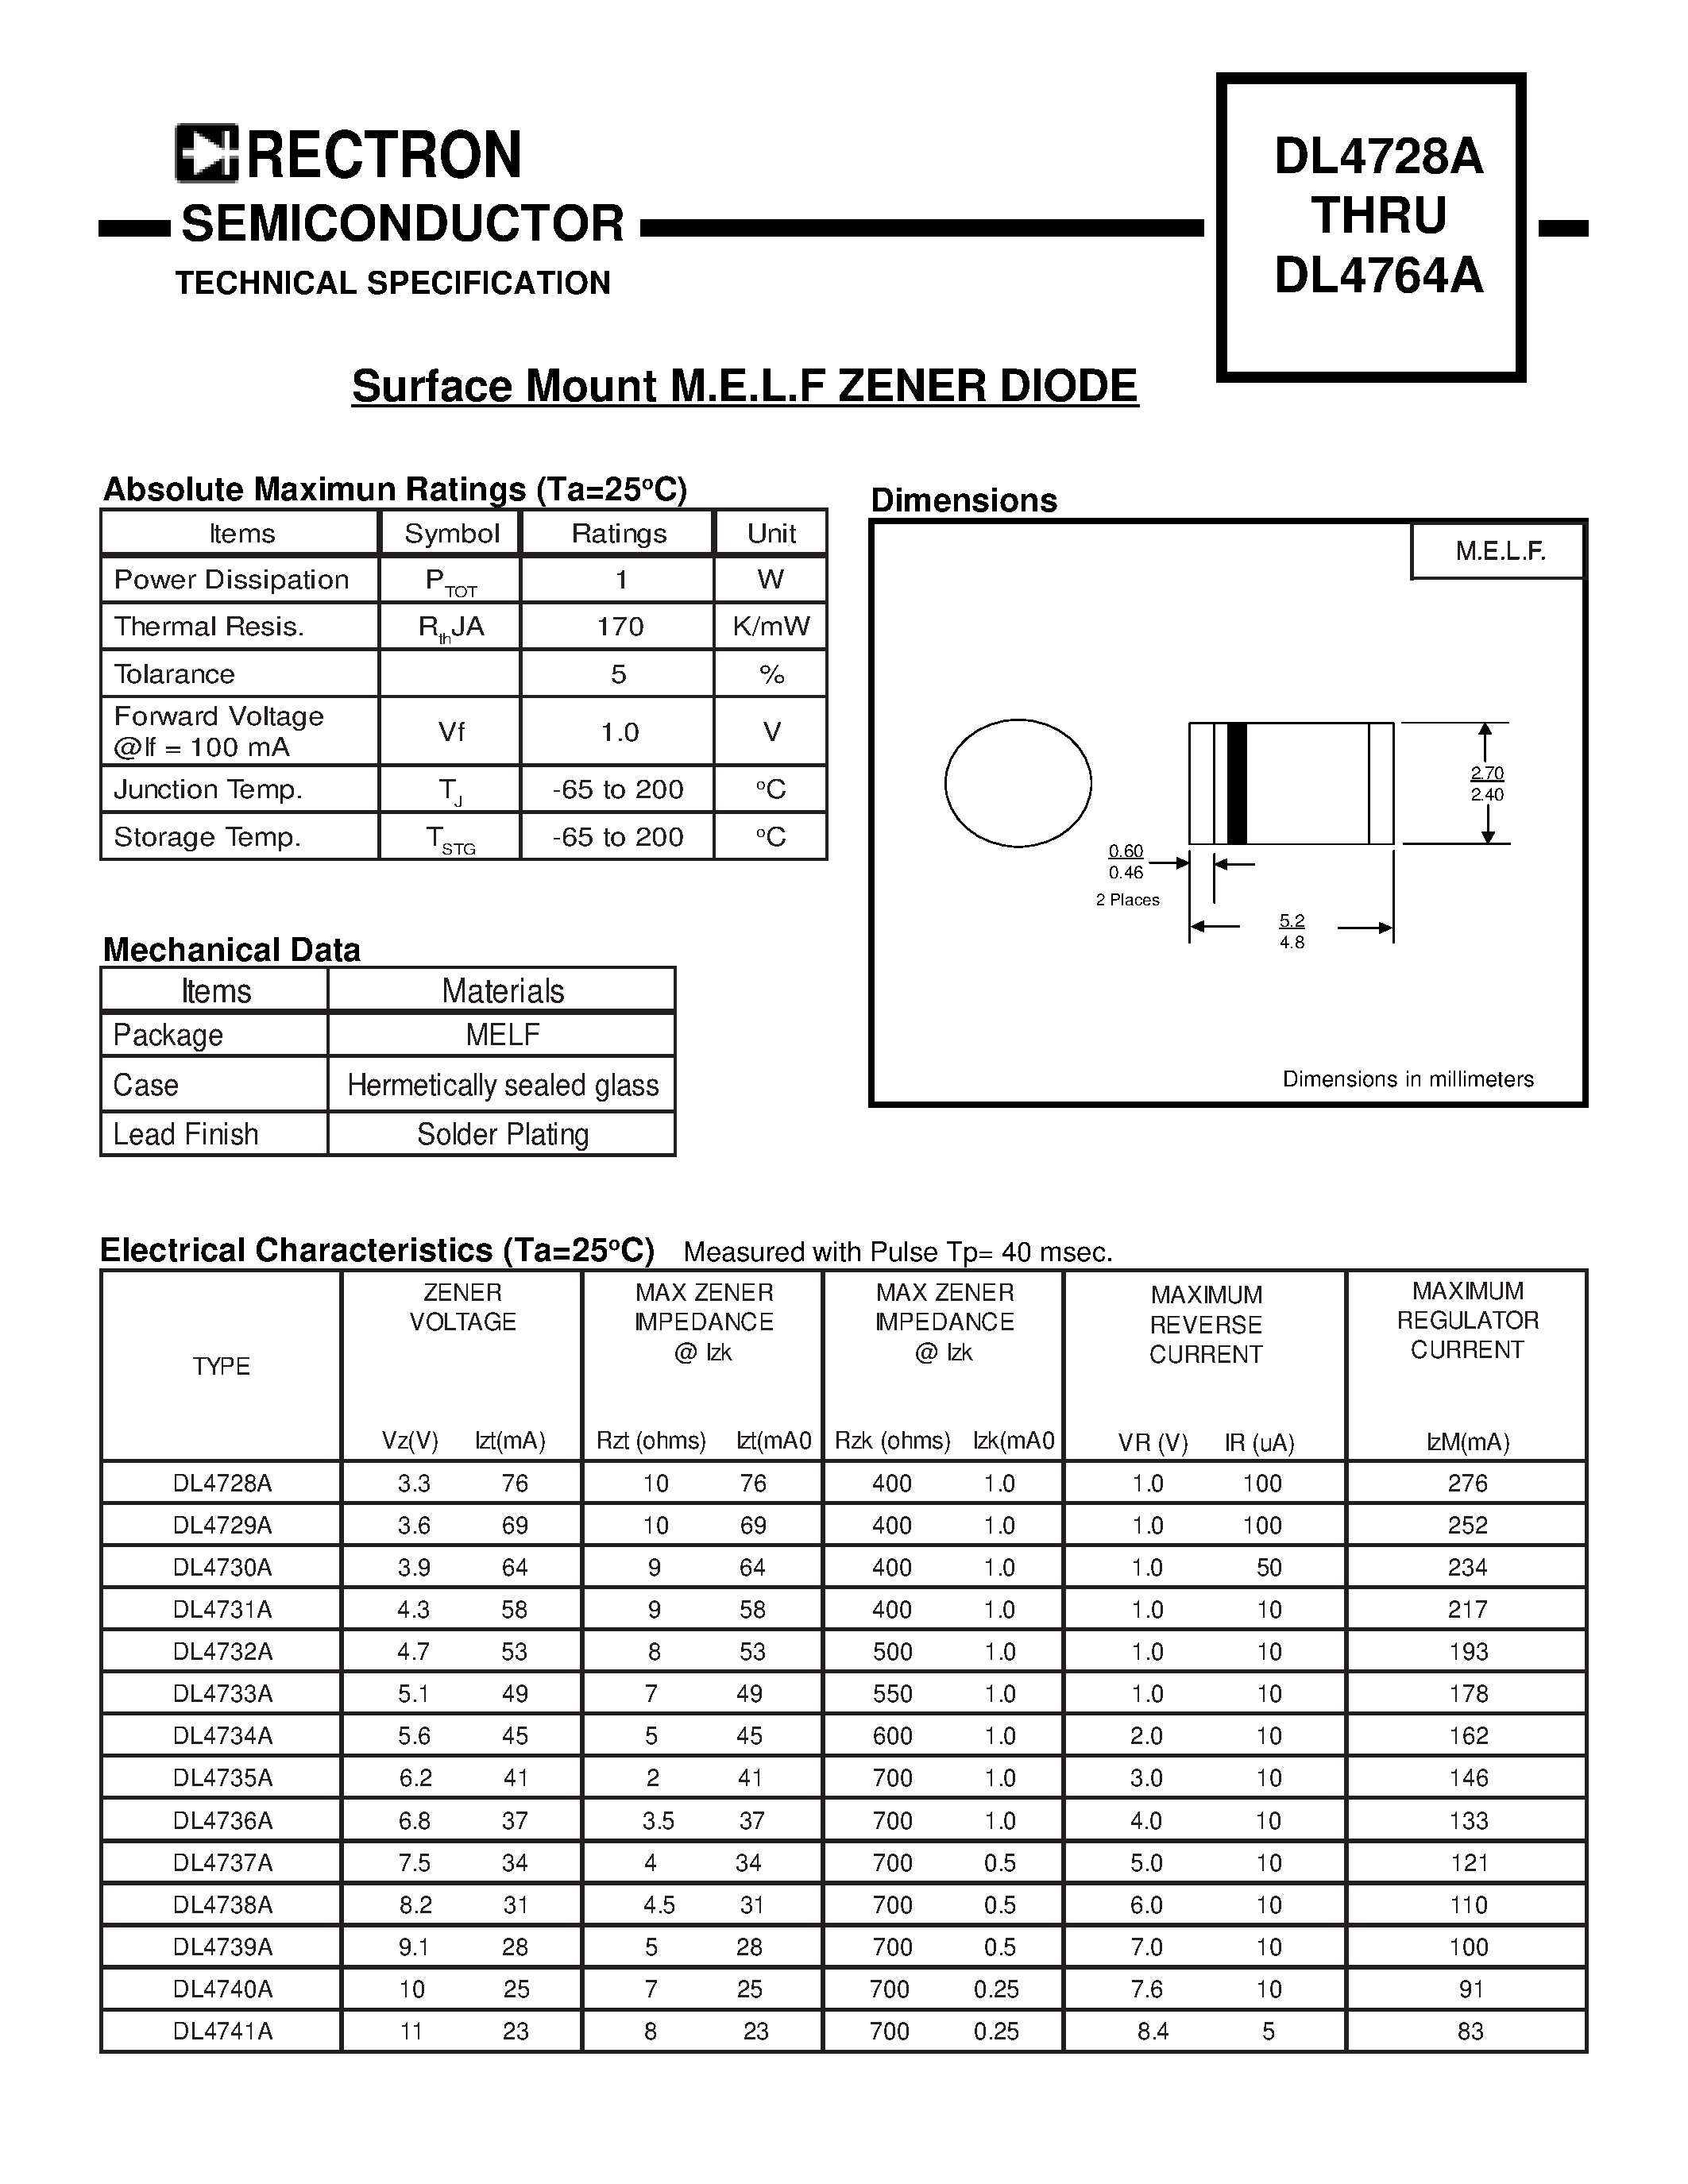 Datasheet DL4729A - Surface Mount M.E.L.F ZENER DIODE page 1